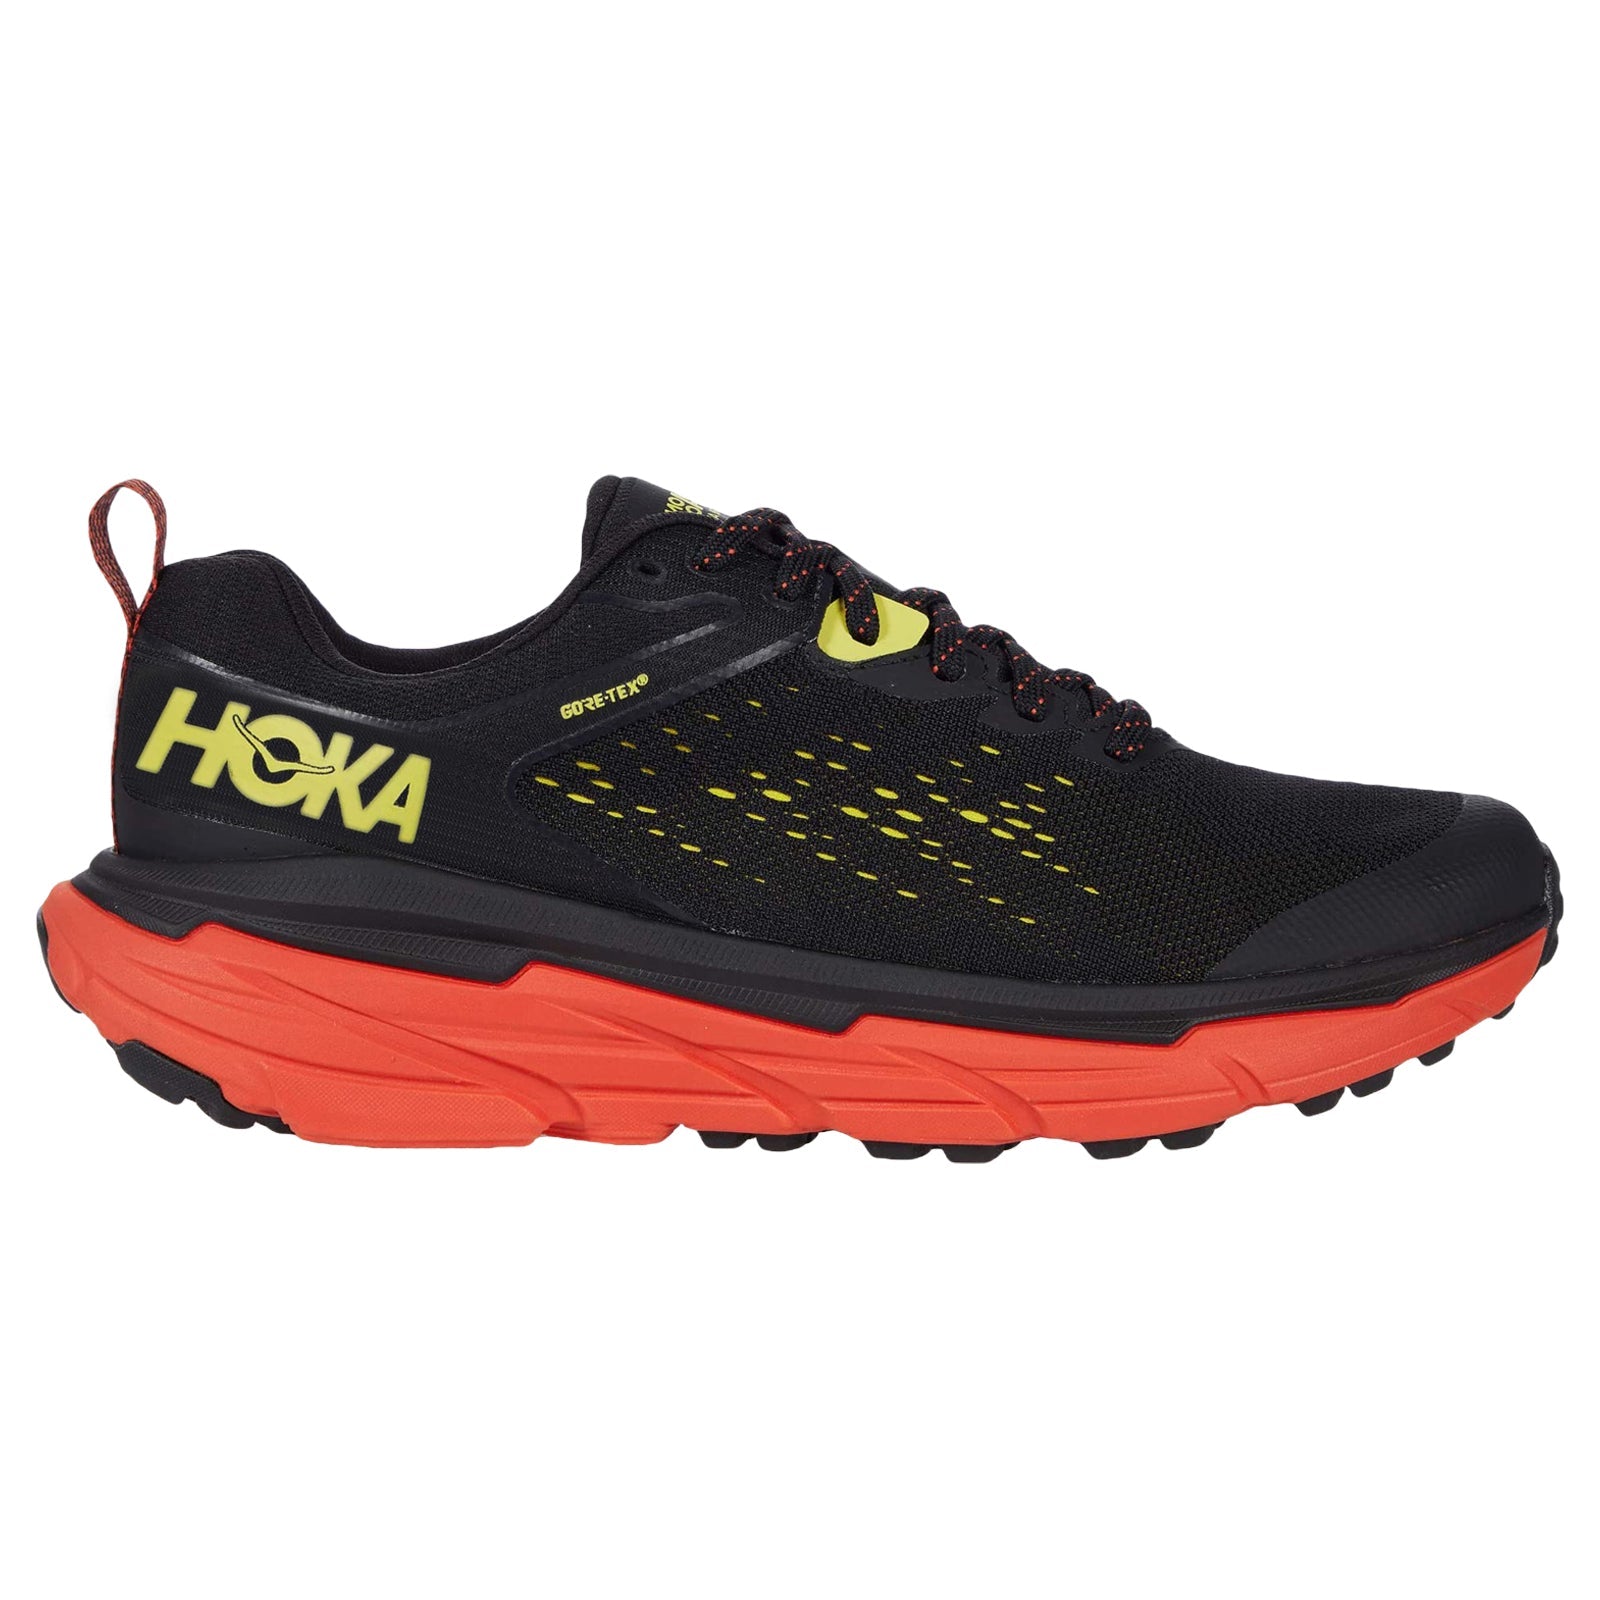 Hoka One One Challenger ATR 6 GTX Synthetic Textile Men's Low-Top Hiking Sneakers#color_black green sheen